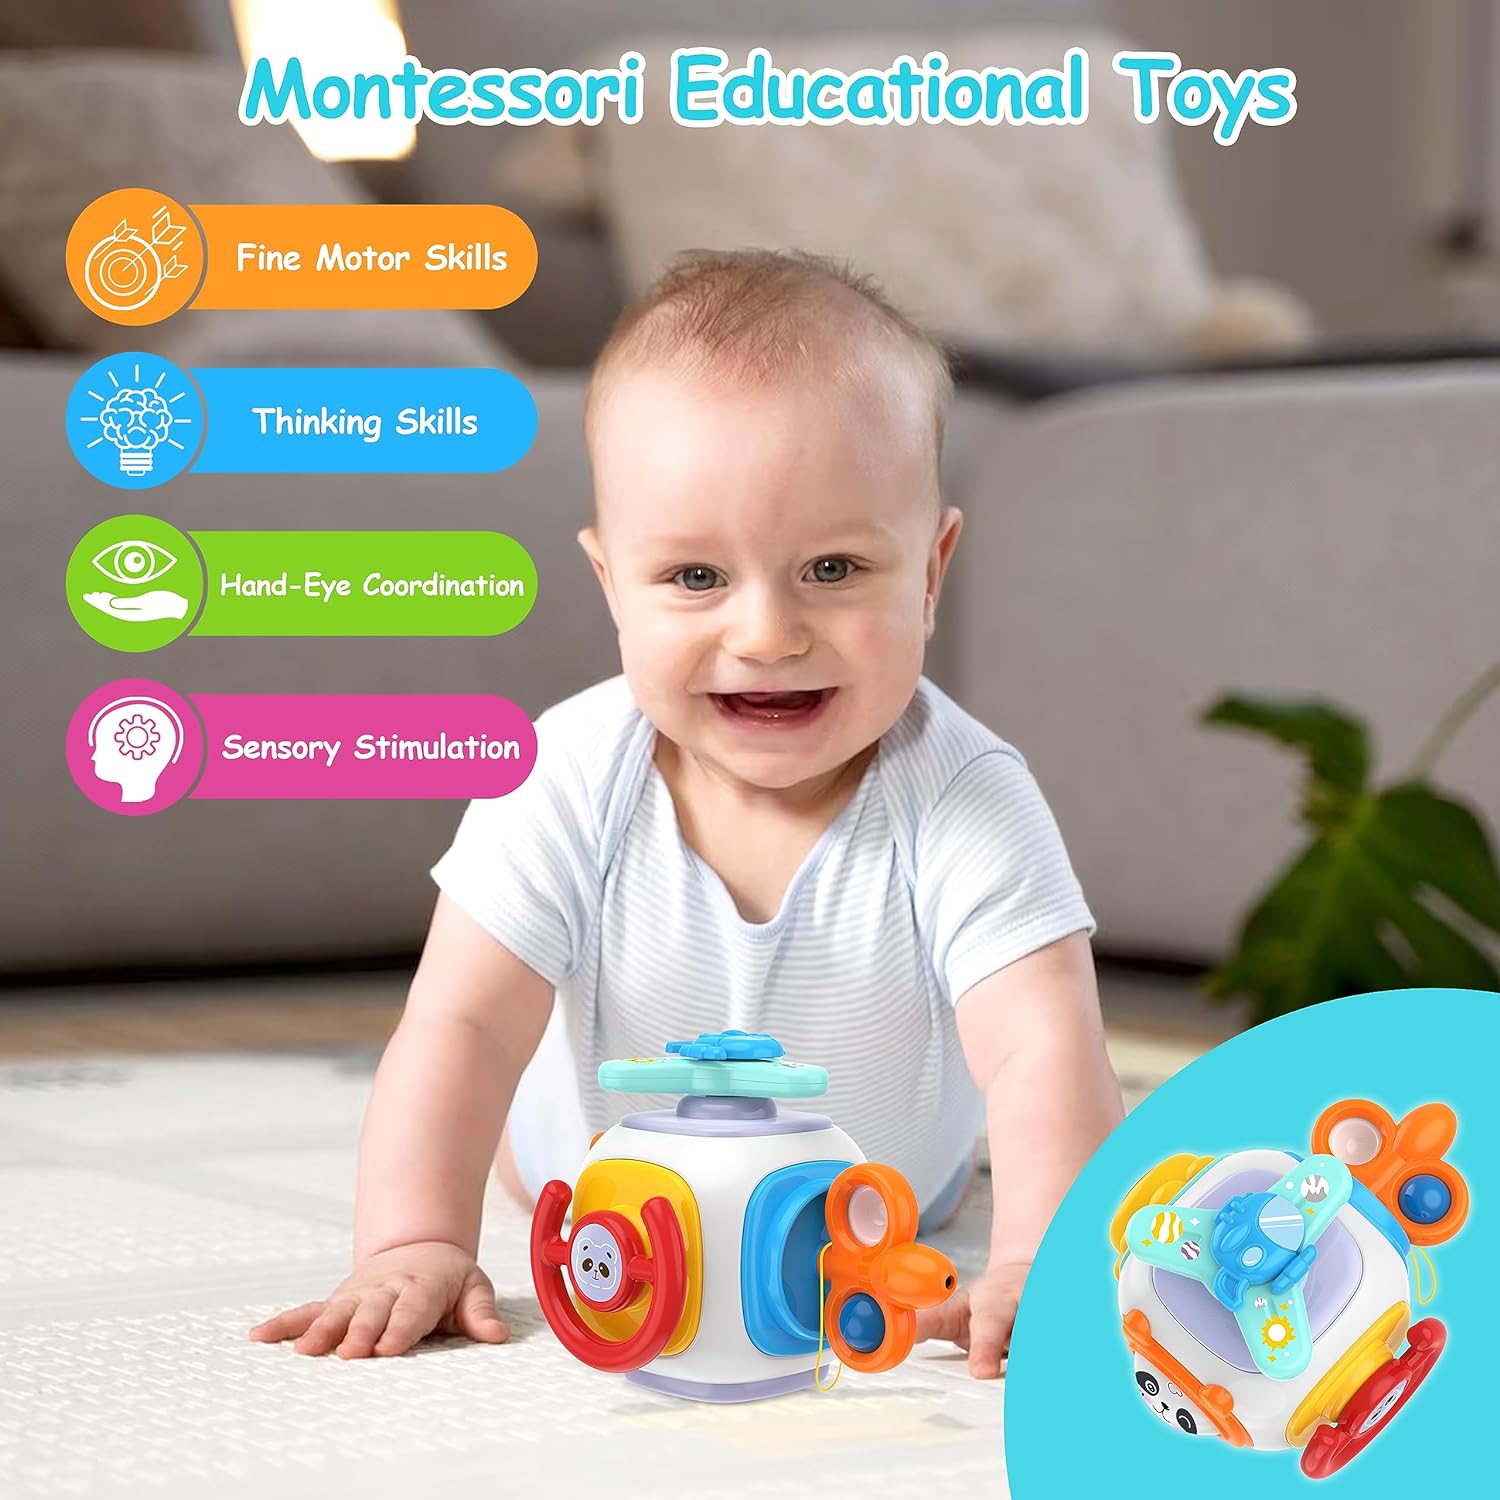 Ouriky 8 in 1 Busy Cube Baby  Toddler Toys, Montessori Sensory Busy Board Travel Toys for Toddlers 1 2 3 Years Old, Educational Learning Fidget Toys 18-36 Month Stocking Stuffers for Kids